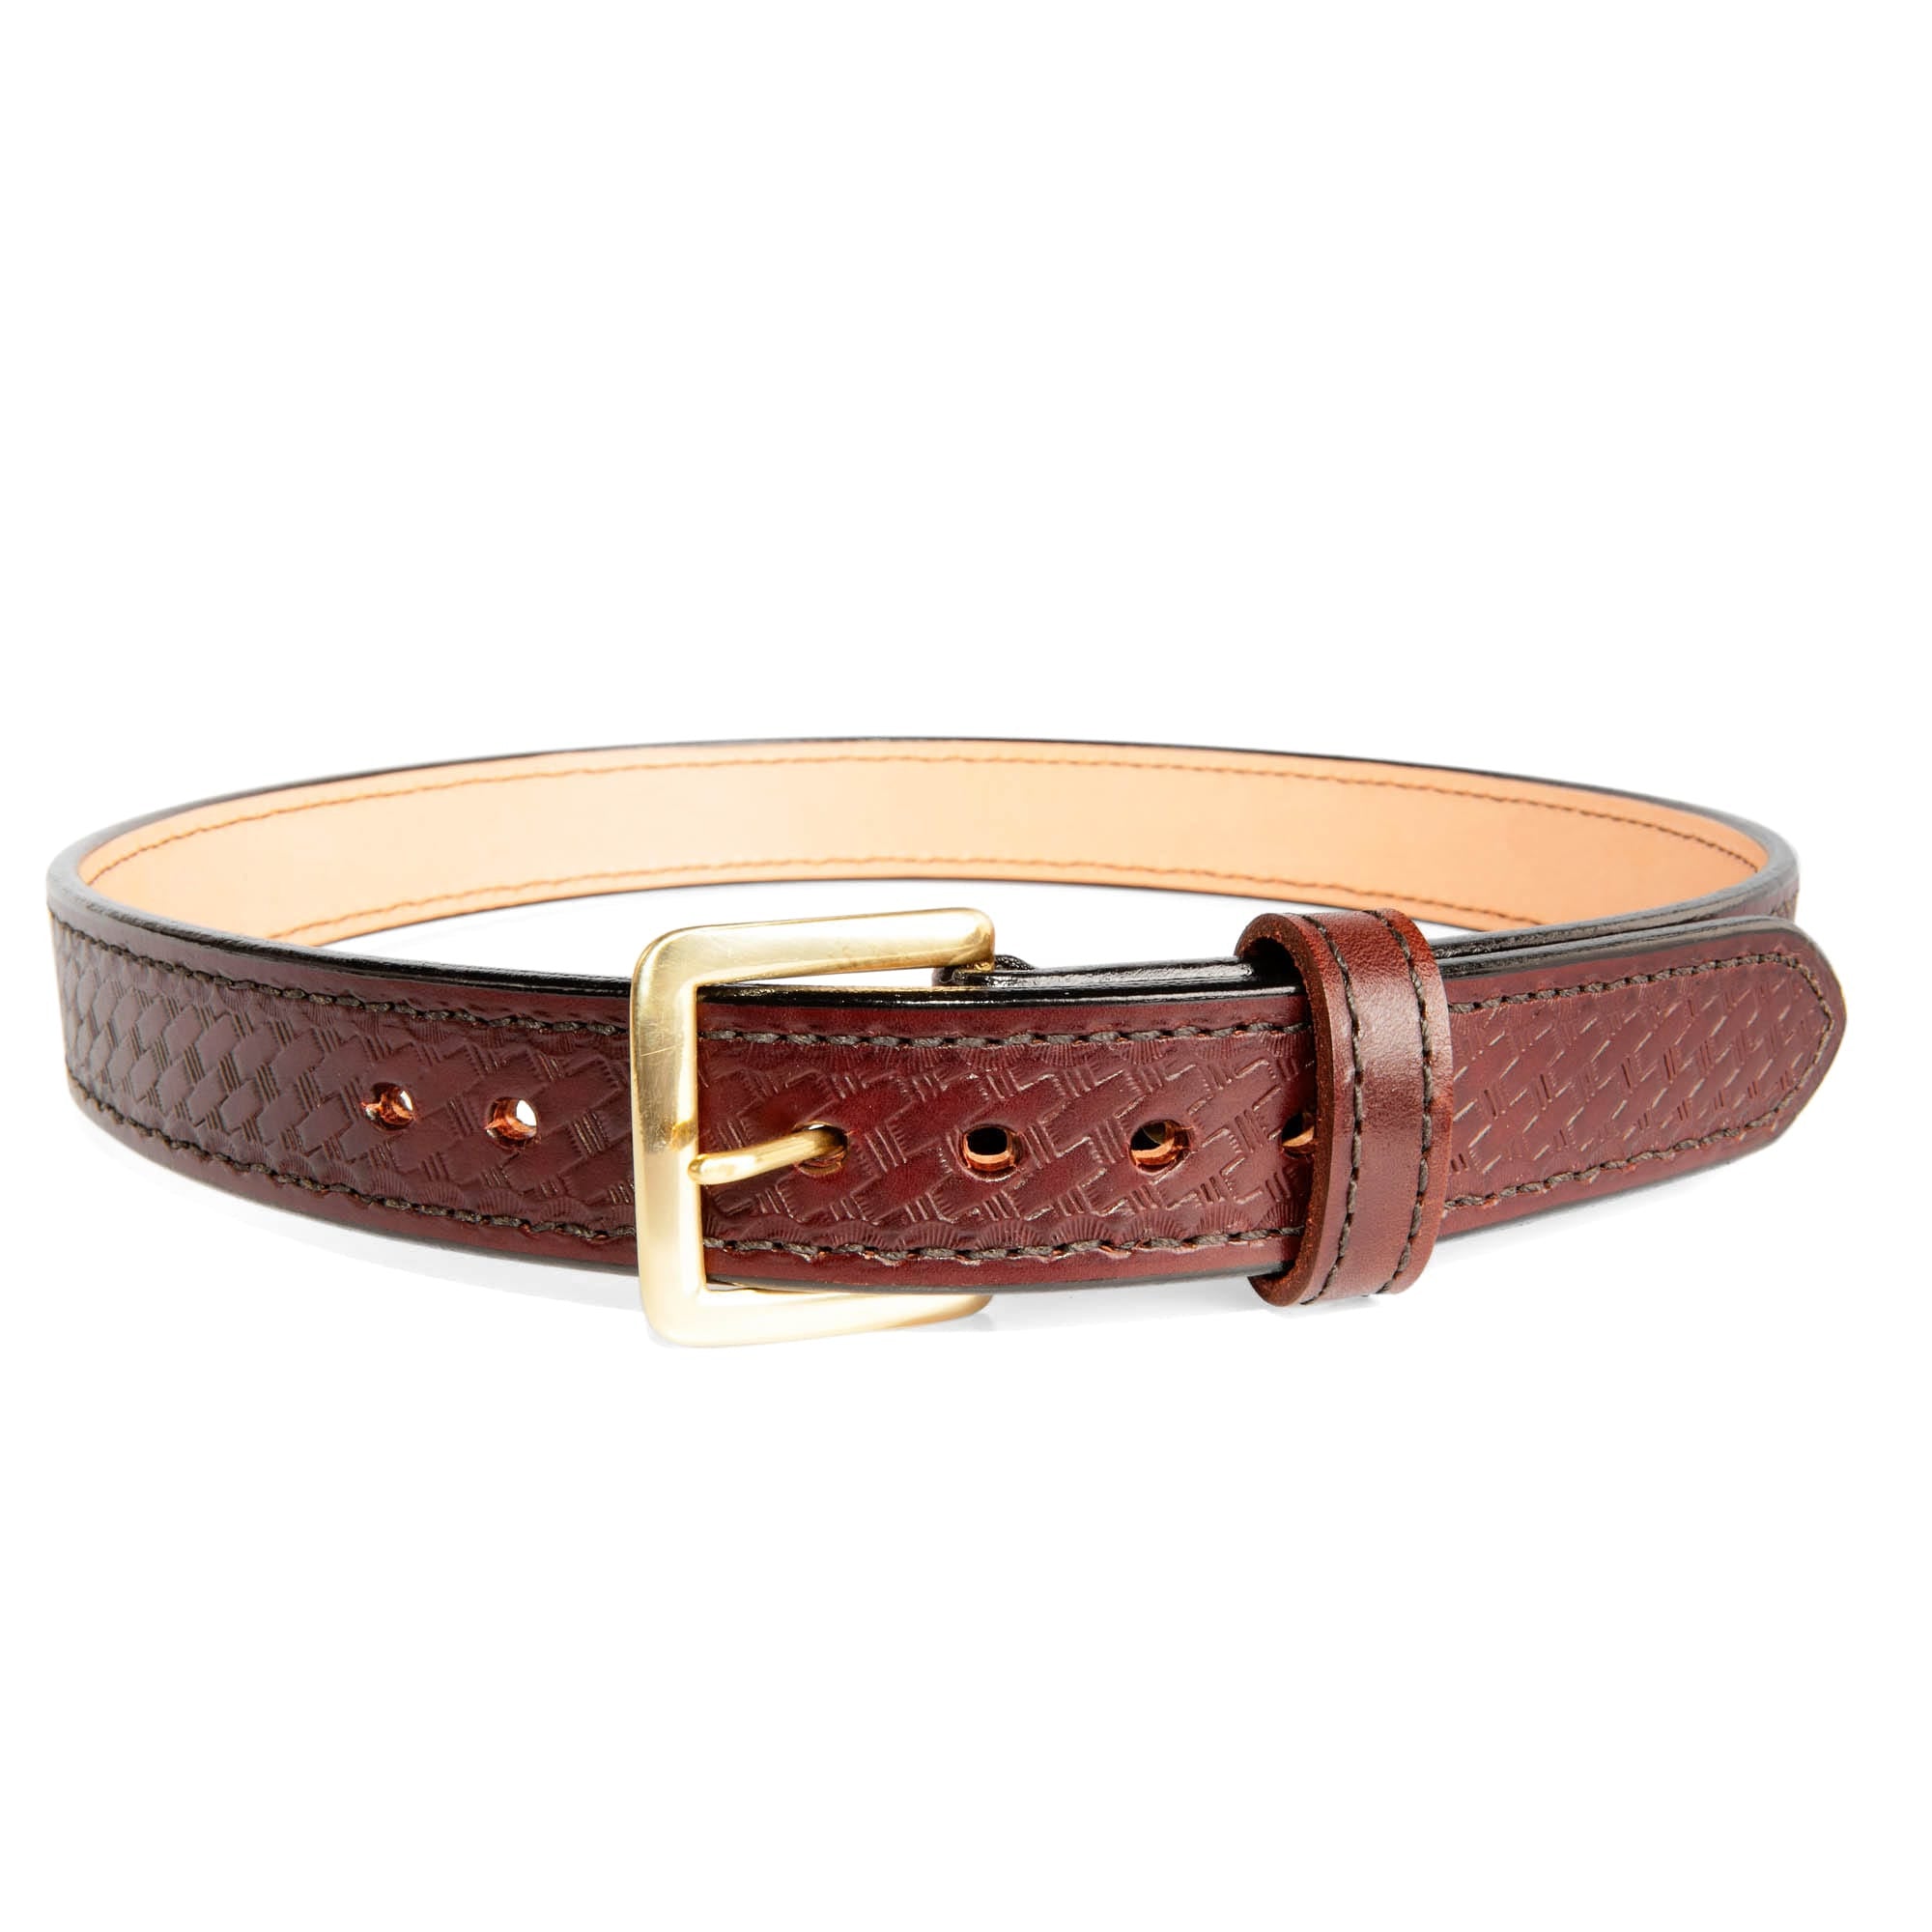 Bullhide Belts， Mens 40 Genuine Leather Double Strap Brown Tan